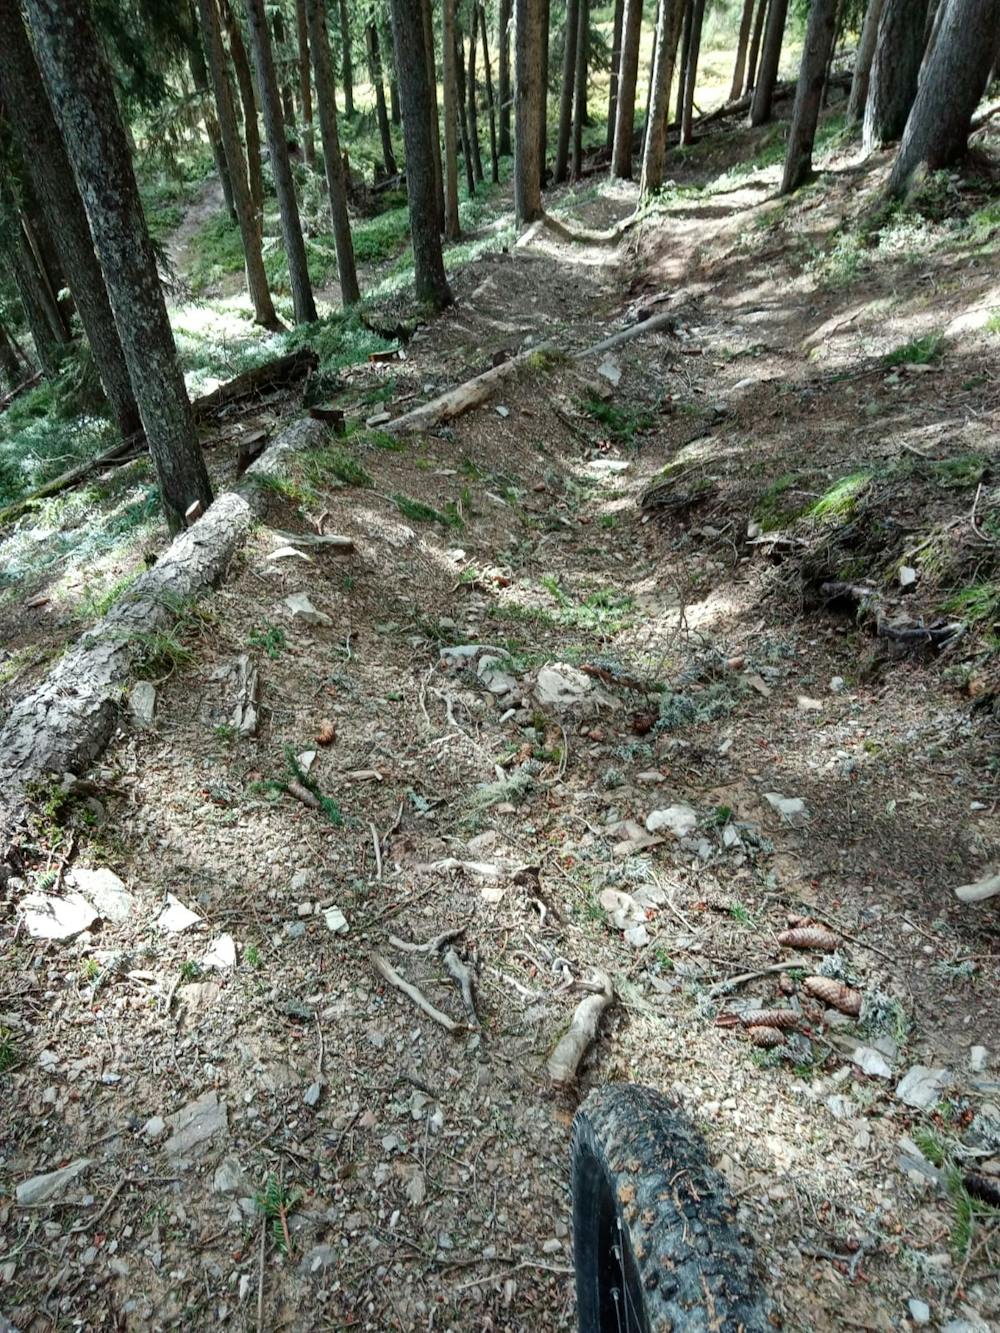 Typically steep and rocky terrain midway down.